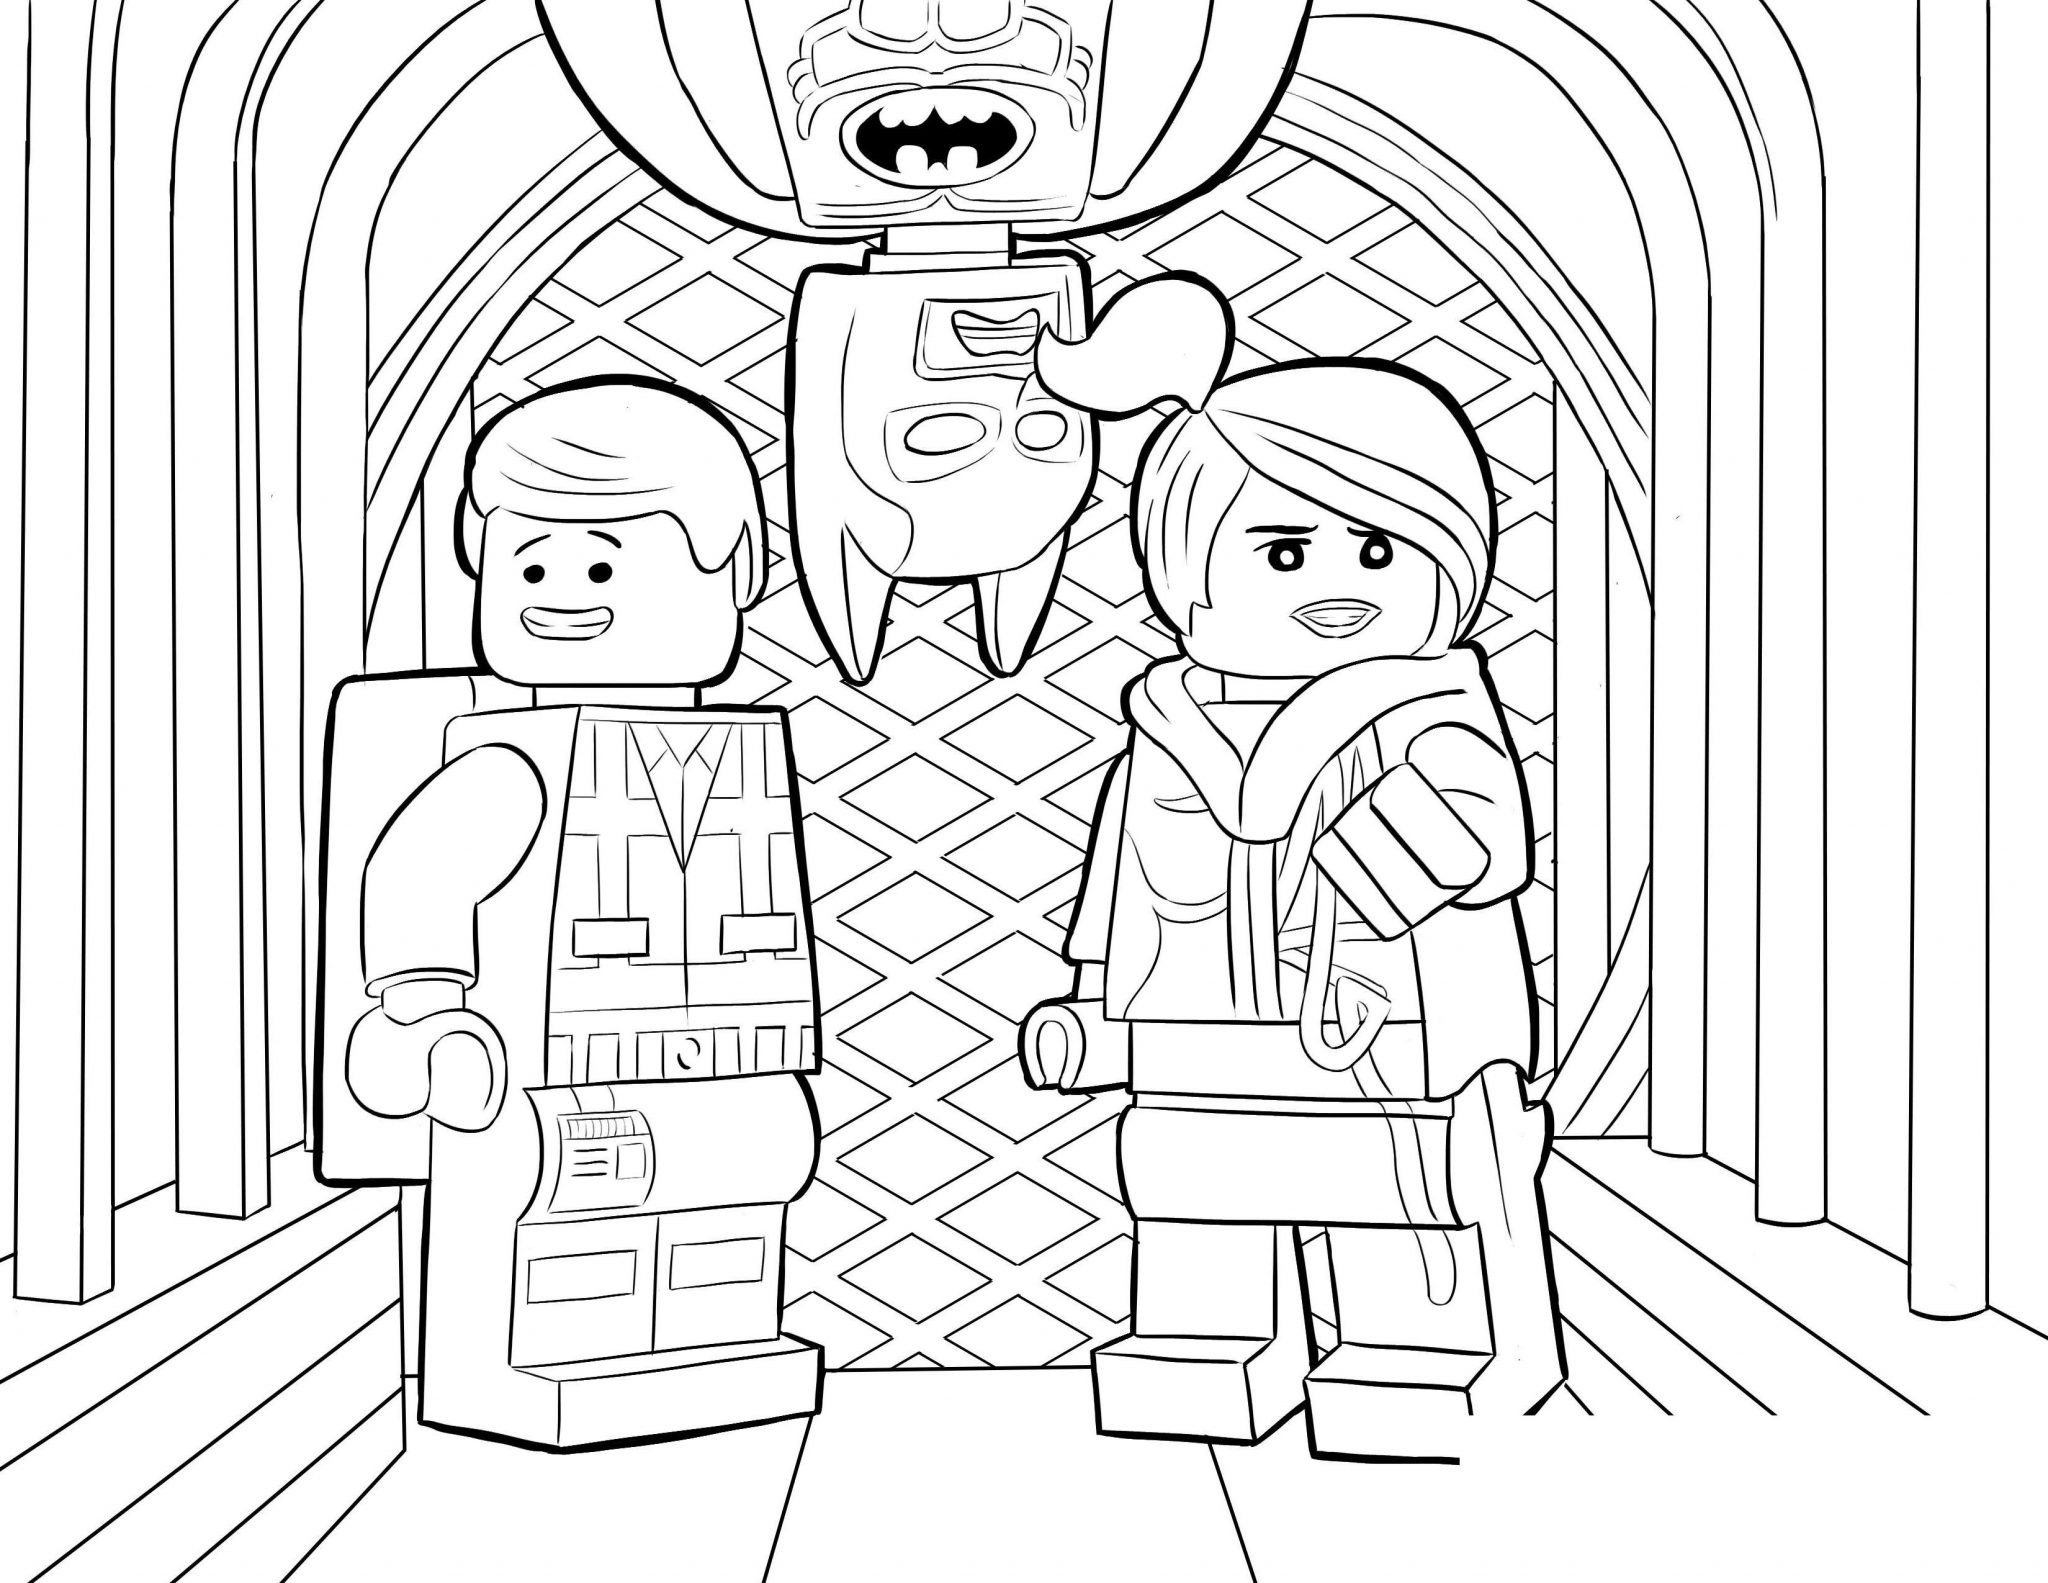 Coloring Pages For Boys Lego Ninjago
 New LEGO Ninjago Coloring Pages for Boys Free Printable